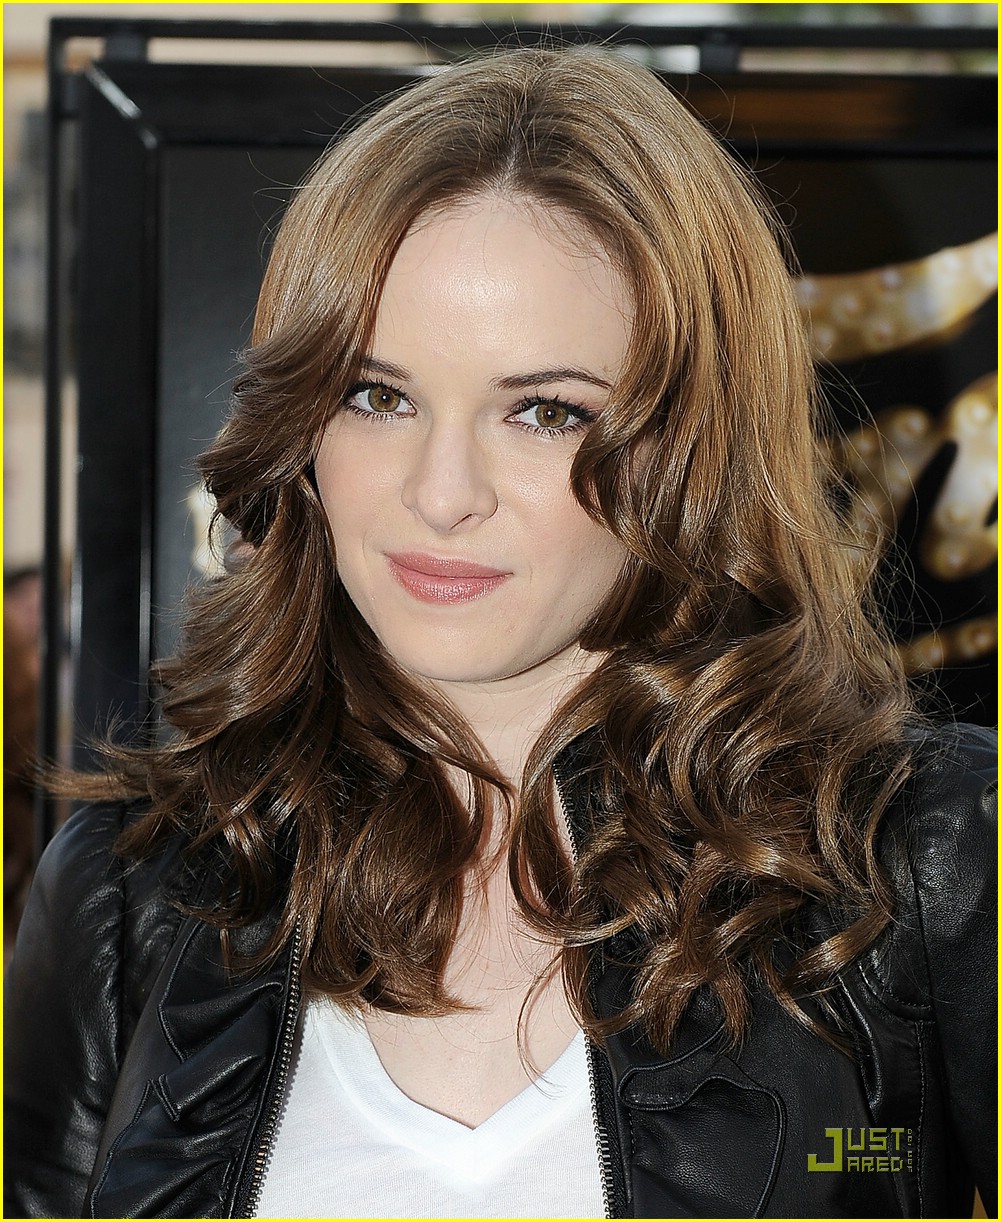 danielle panabaker fame premiere 06